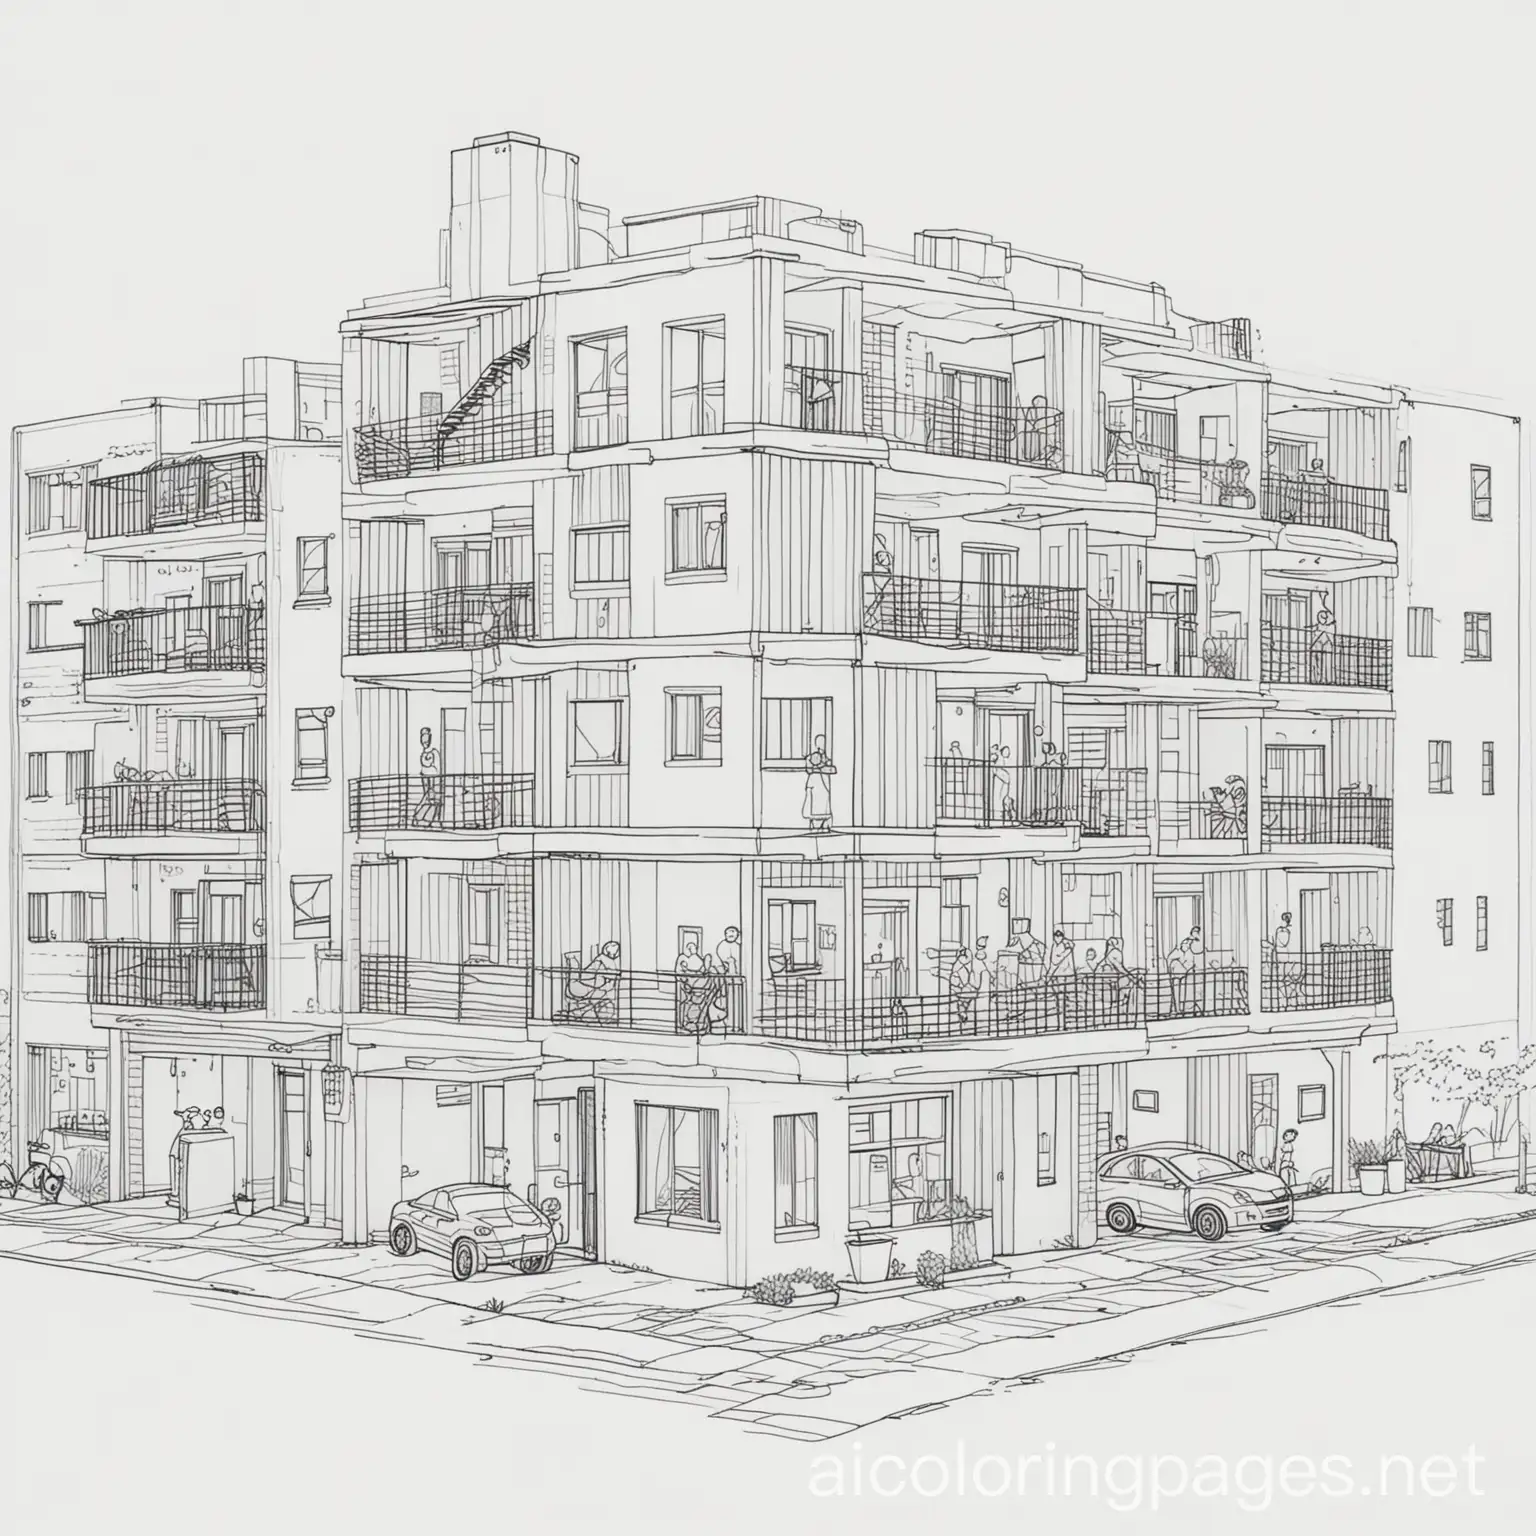 modern apartments with offices and construction and people, Coloring Page, black and white, line art, white background, Simplicity, Ample White Space. The background of the coloring page is plain white to make it easy for young children to color within the lines. The outlines of all the subjects are easy to distinguish, making it simple for kids to color without too much difficulty